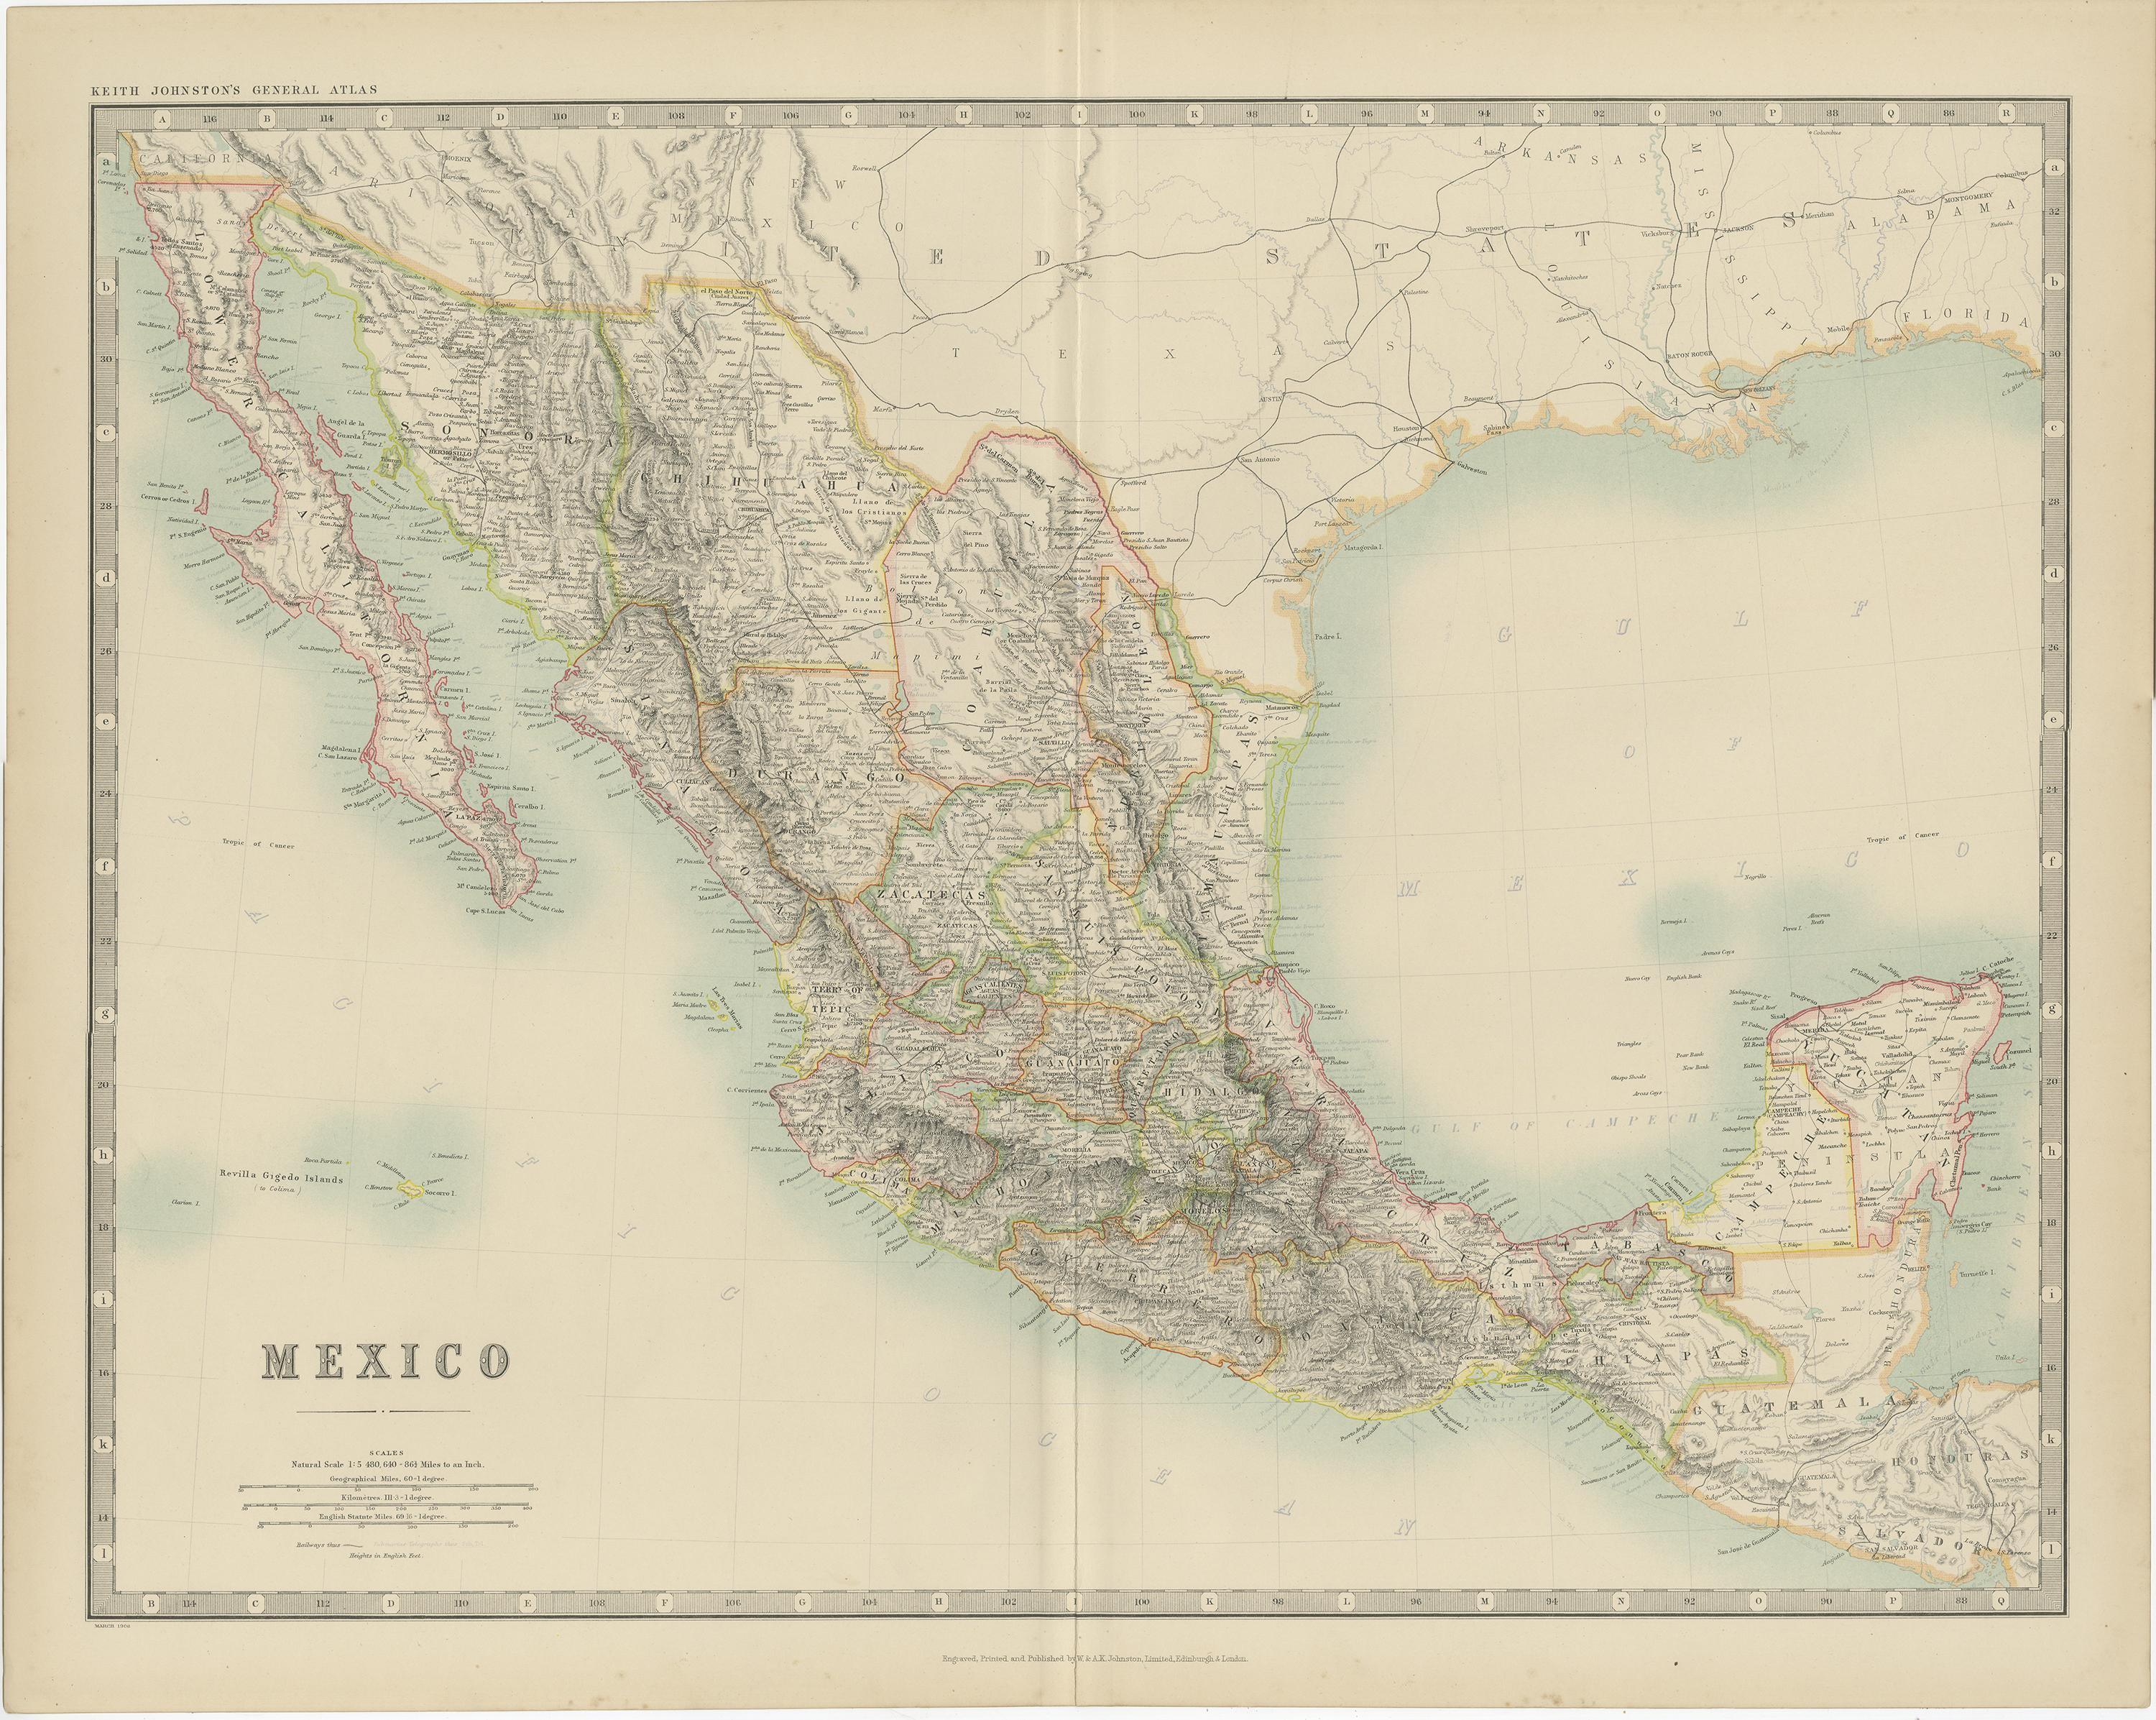 Antique map titled 'Mexico'. Original antique map of Mexico. This map originates from the ‘Royal Atlas of Modern Geography’. Published by W. & A.K. Johnston, 1909.